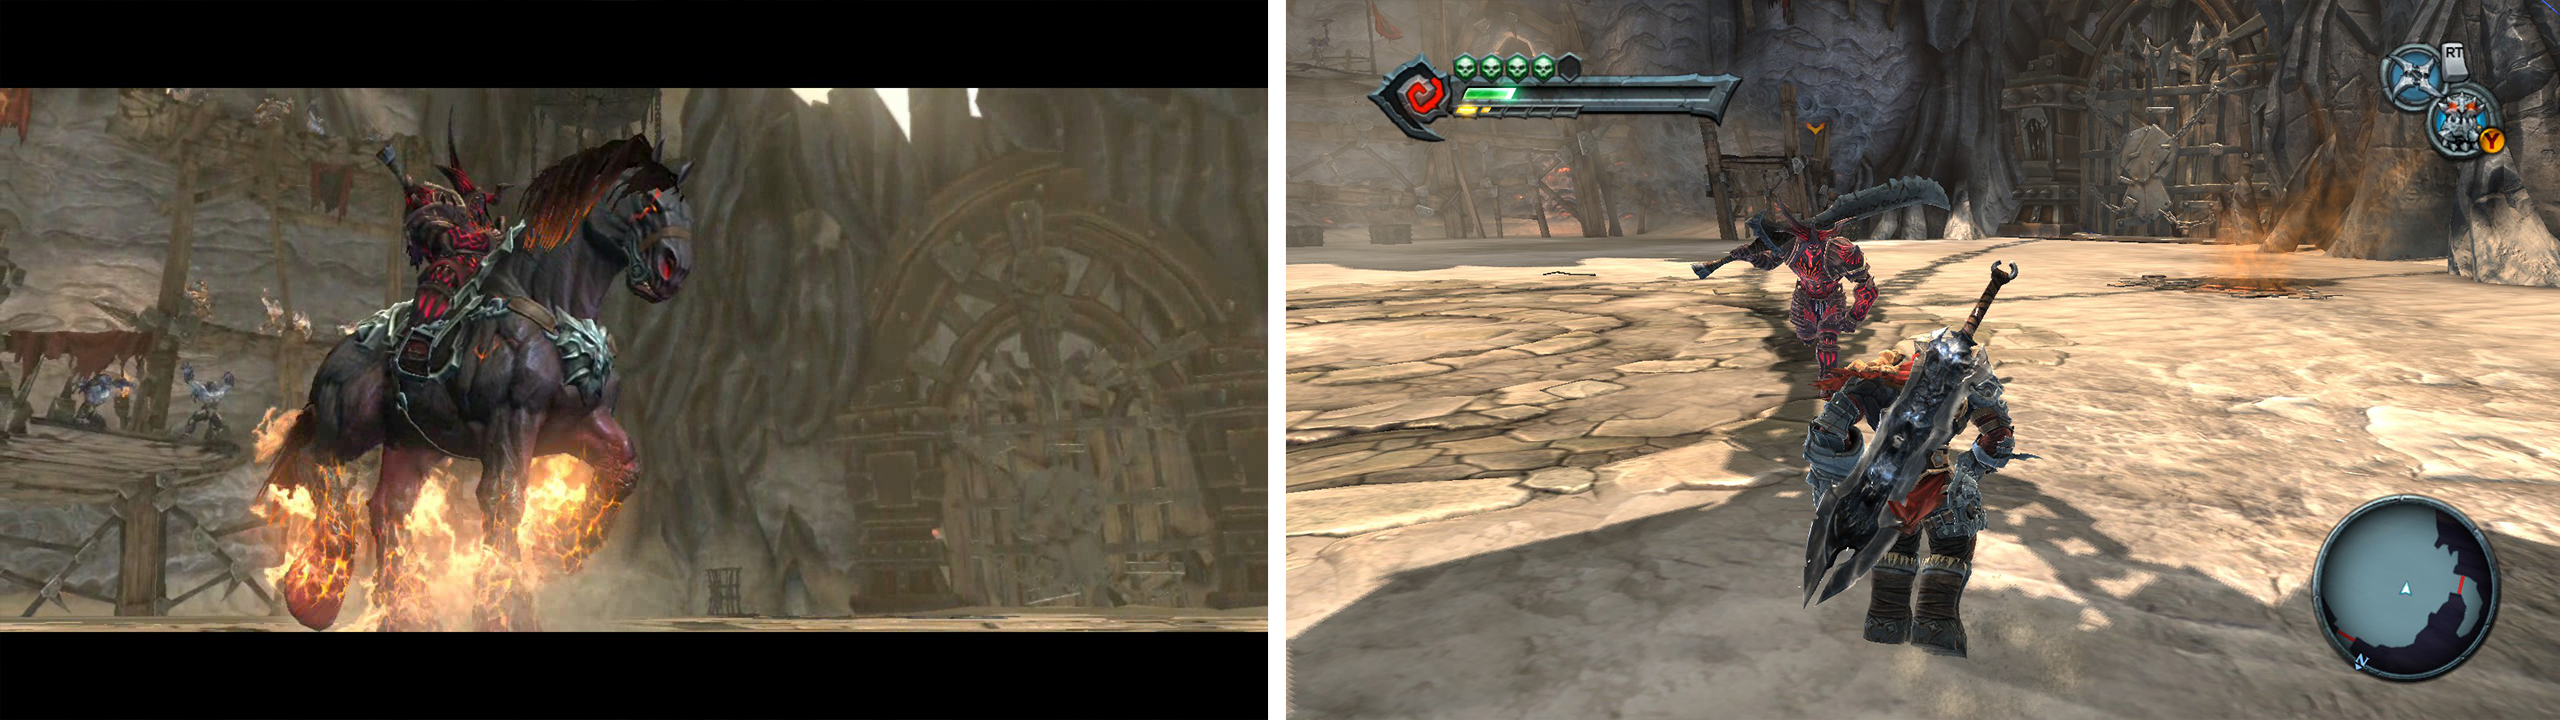 During the first phase, the Arena master will attack from horseback (left). During the second phase, he’ll fight from the ground (right).